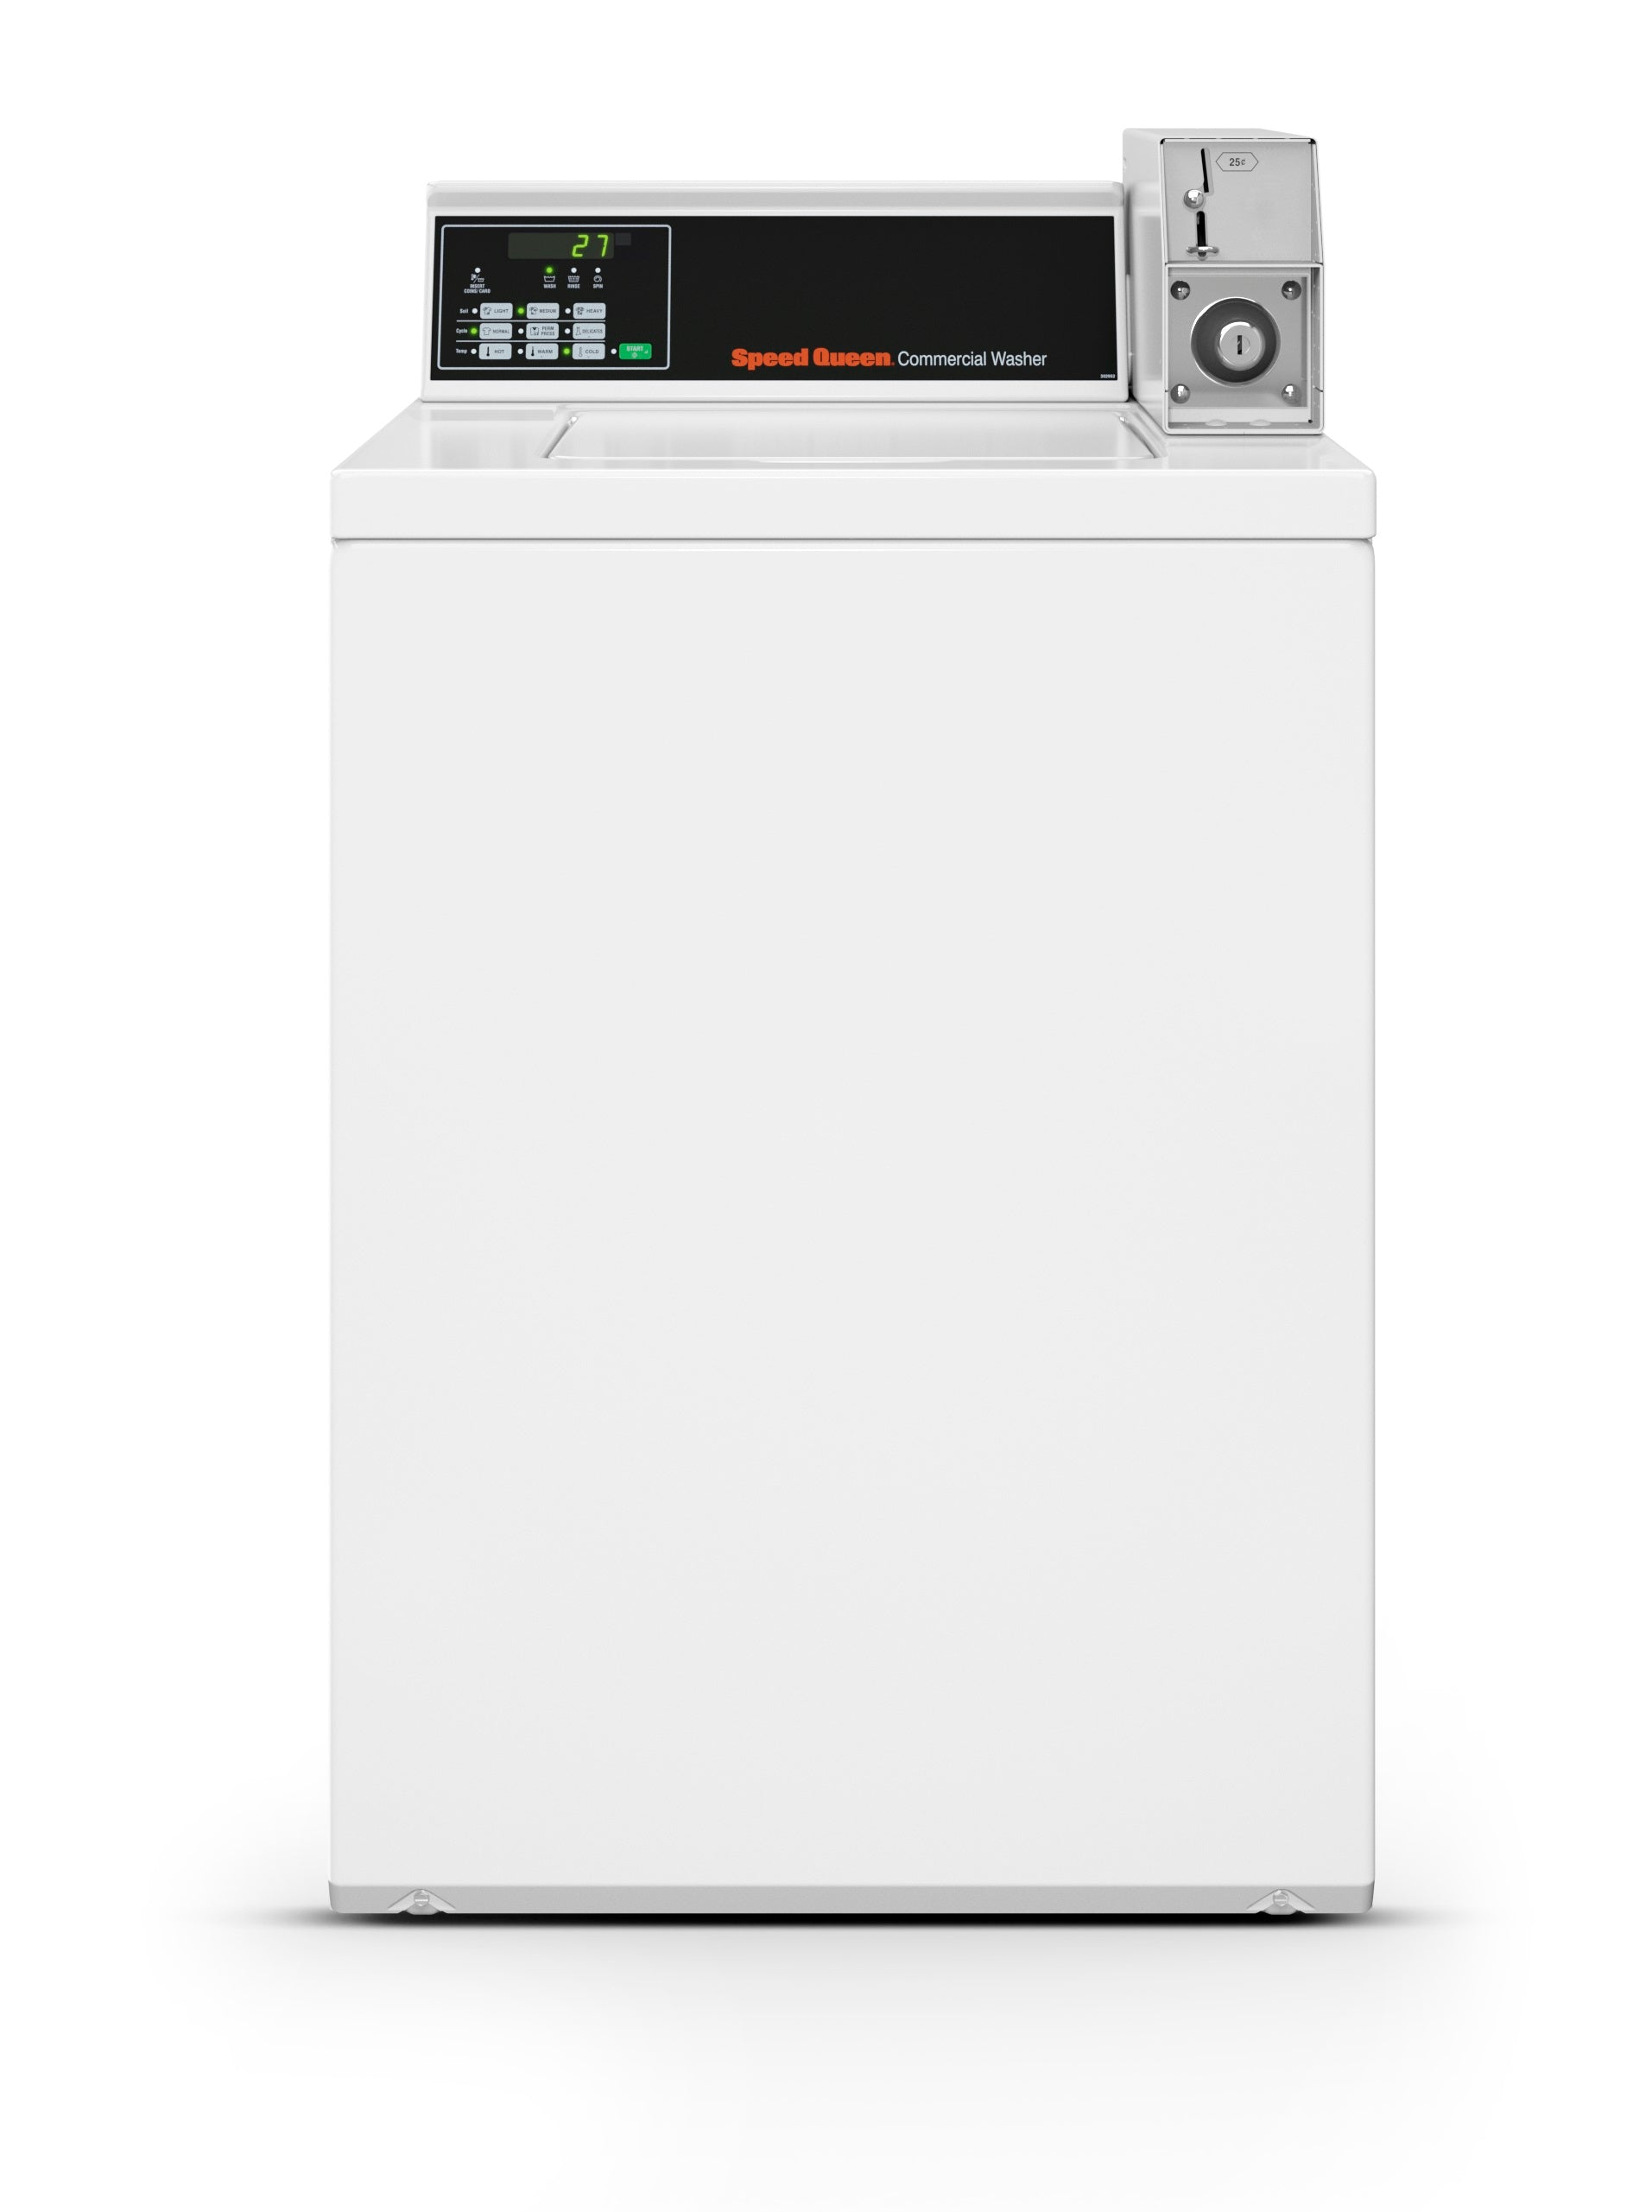 Speed Queen Washer, Midwest Laundries Inc